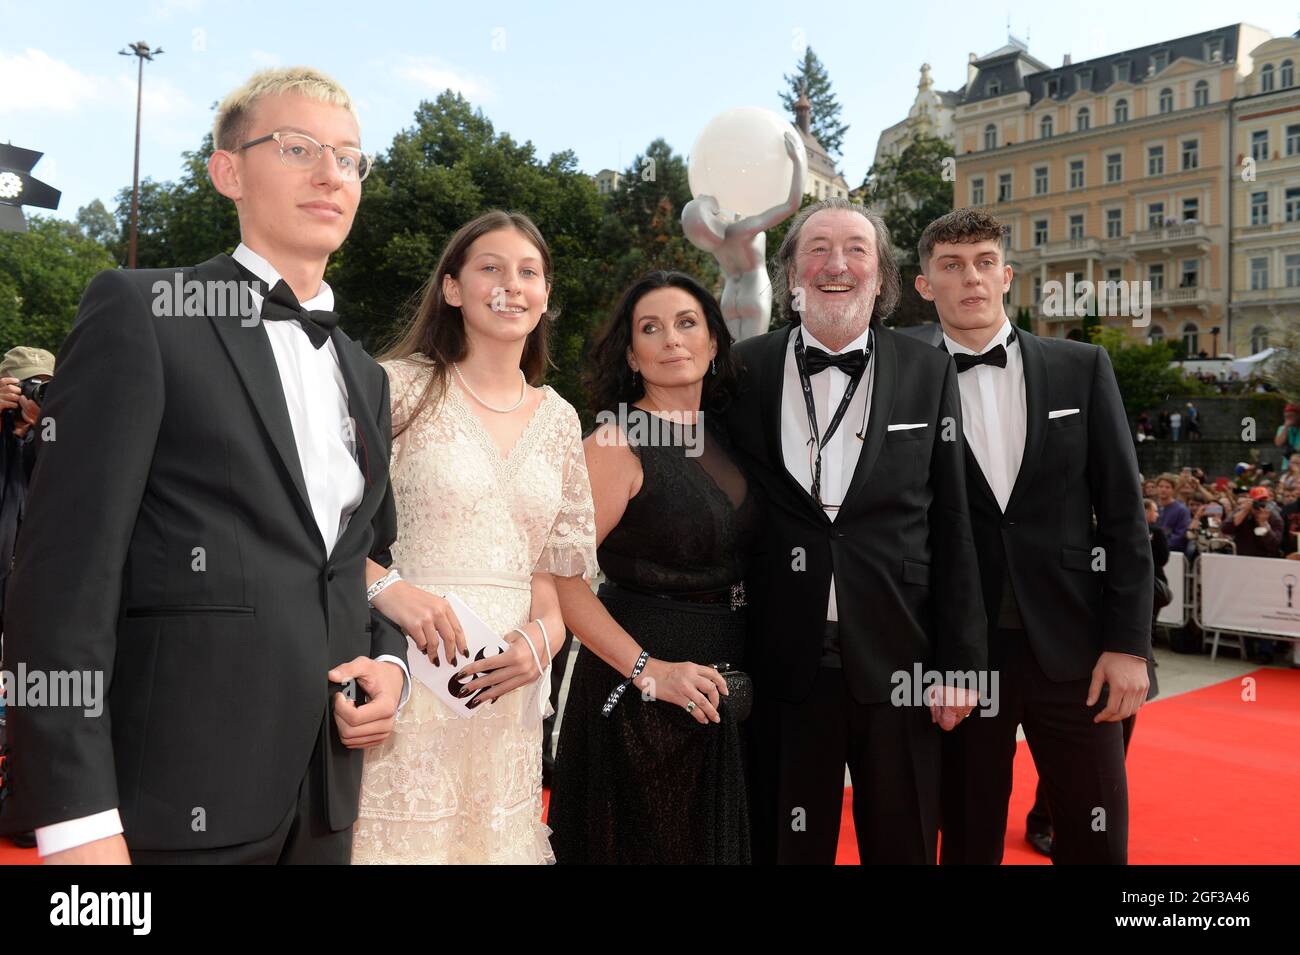 Czech actor Bolek (Boleslav) Polivka, 2nd from right, his wife Marcela Polivkova, center, and his children arrive to the start of the 55th edition of Stock Photo